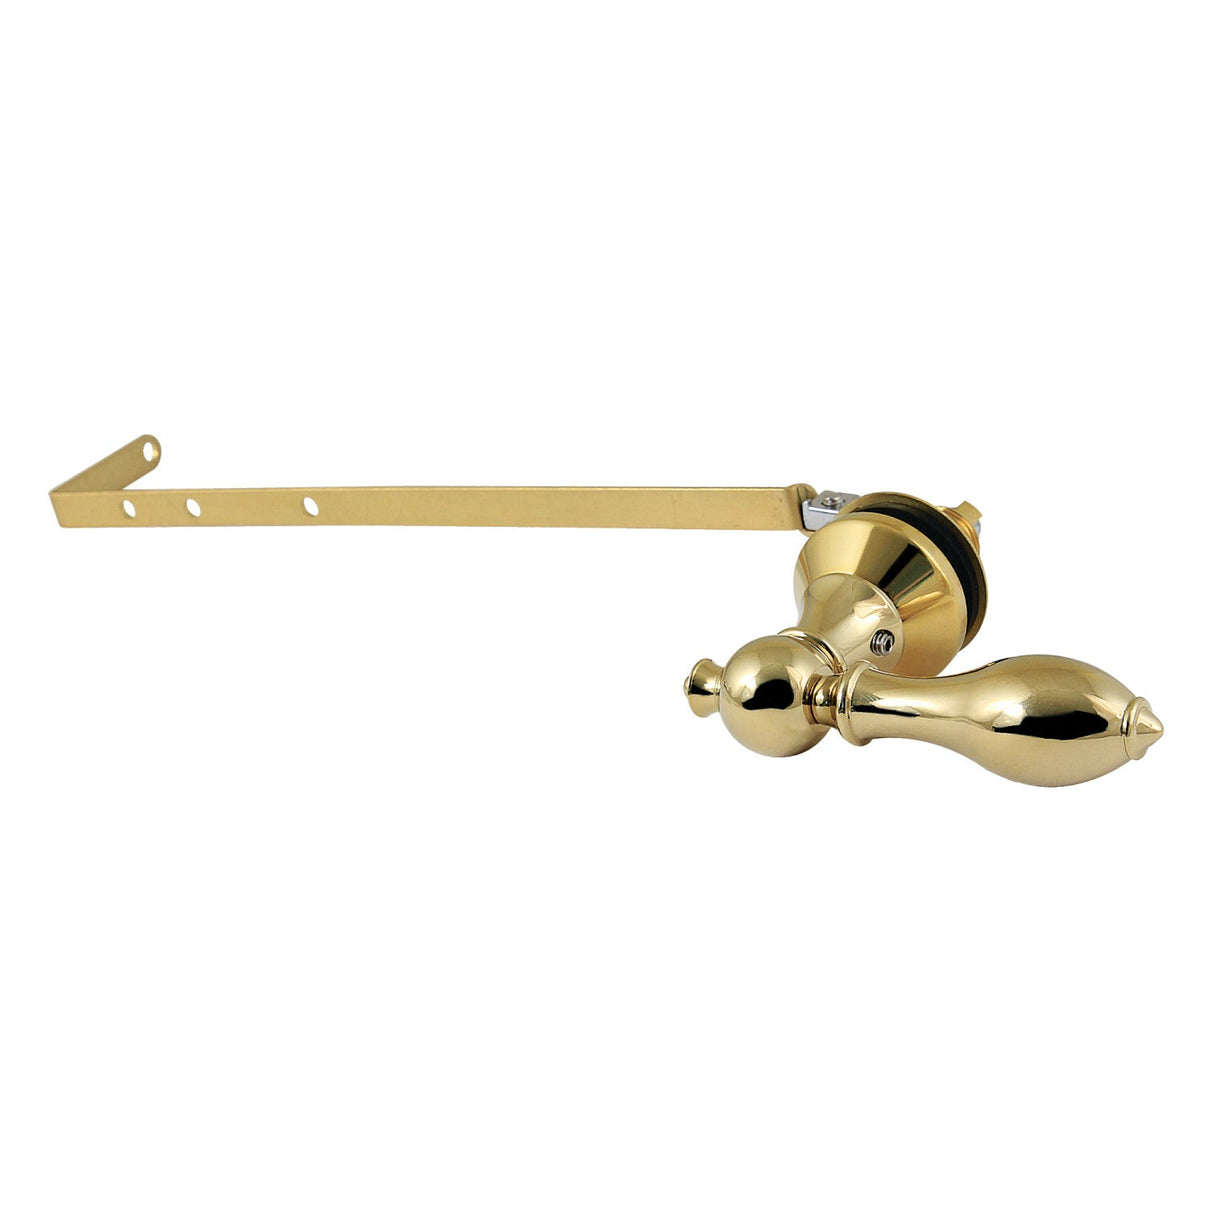 American Classic KTACLD2 Universal Front or Side Mount Toilet Tank Lever, Polished Brass